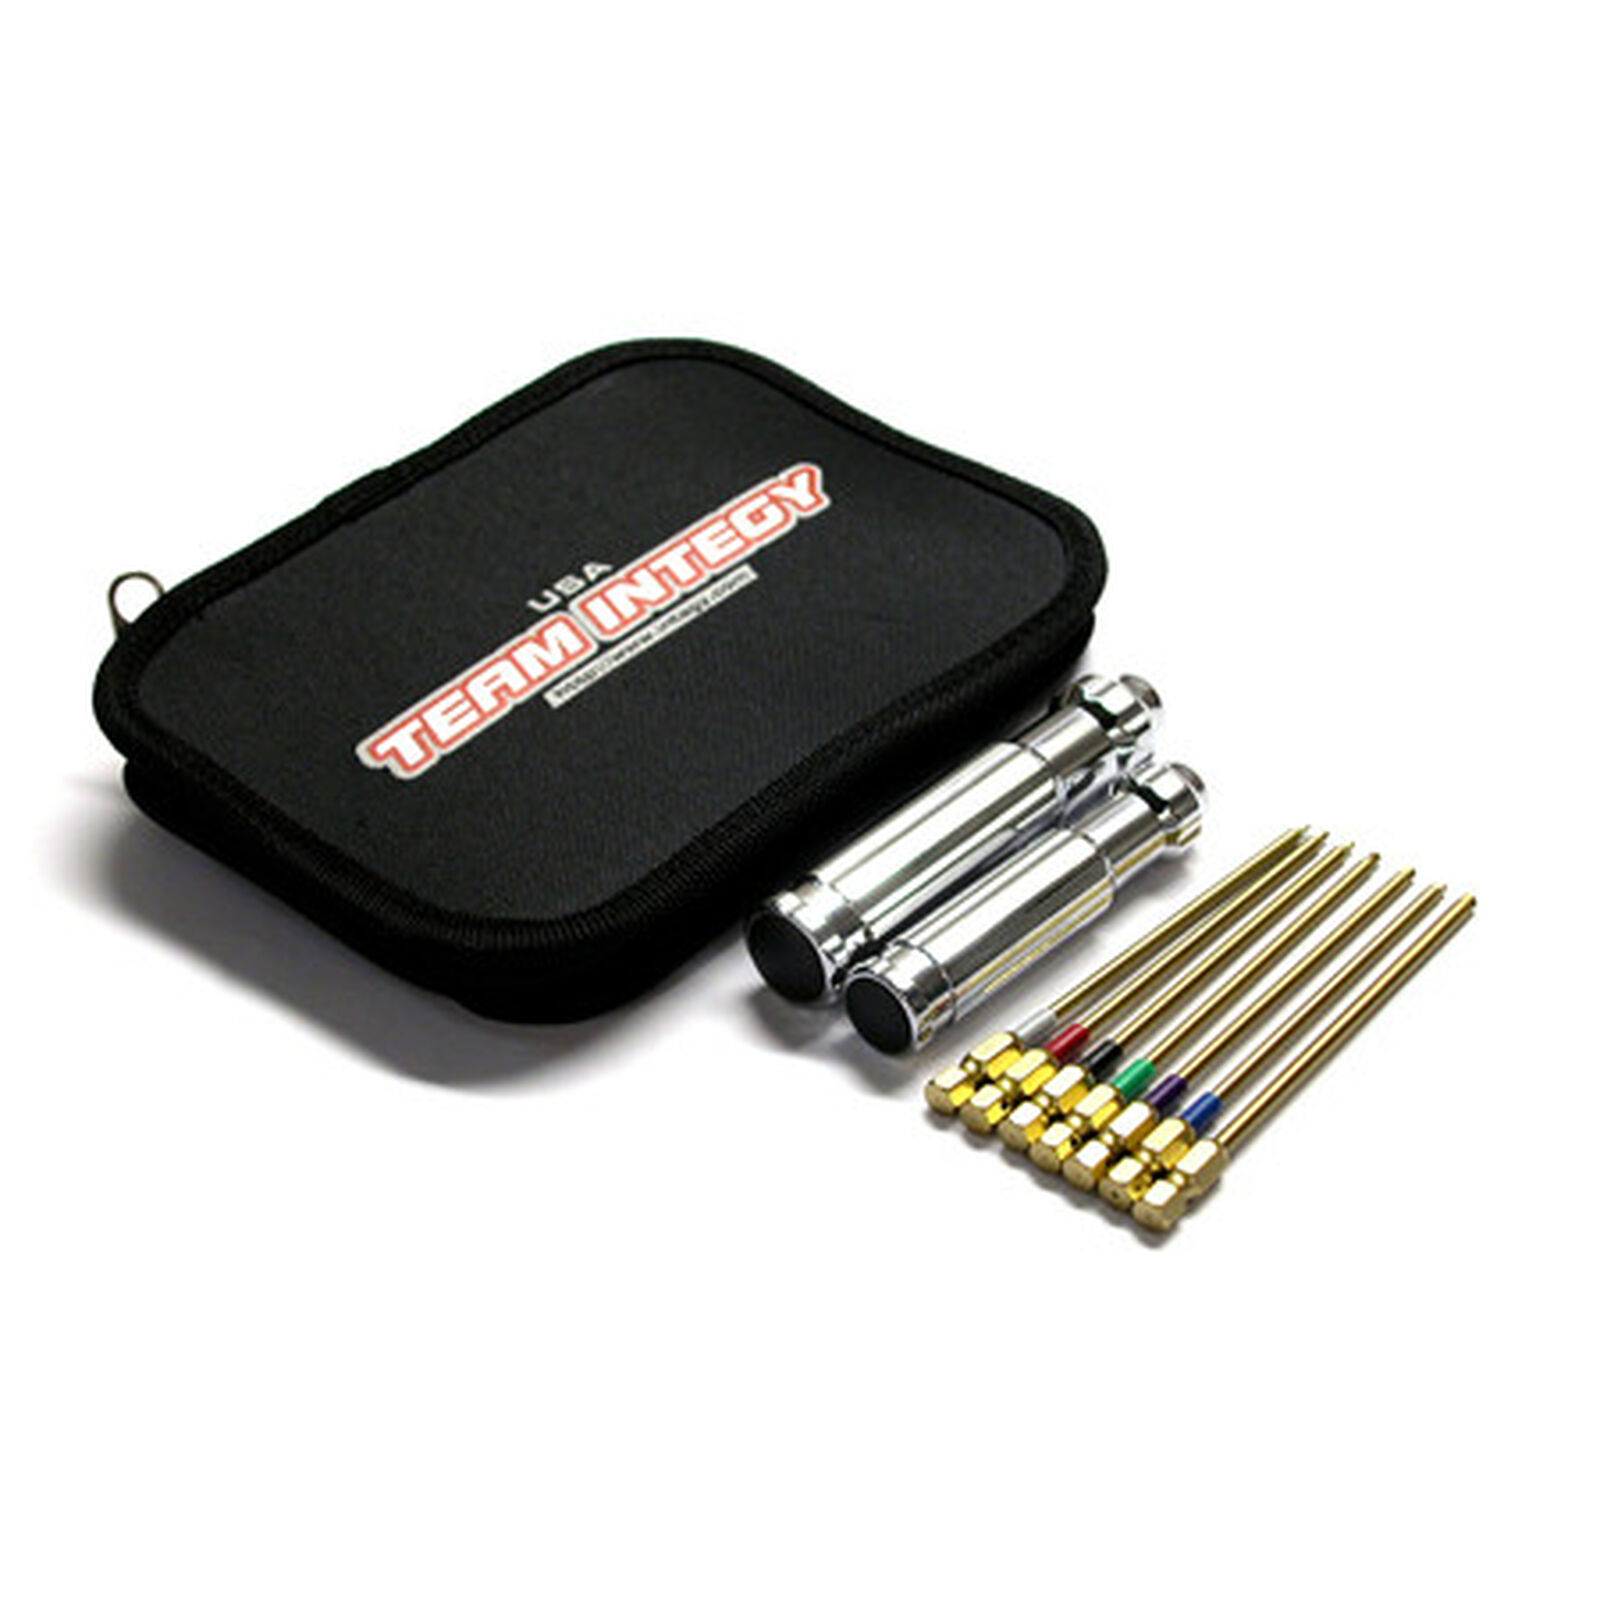 QuickPit Dual WrenchSet with Case (7)